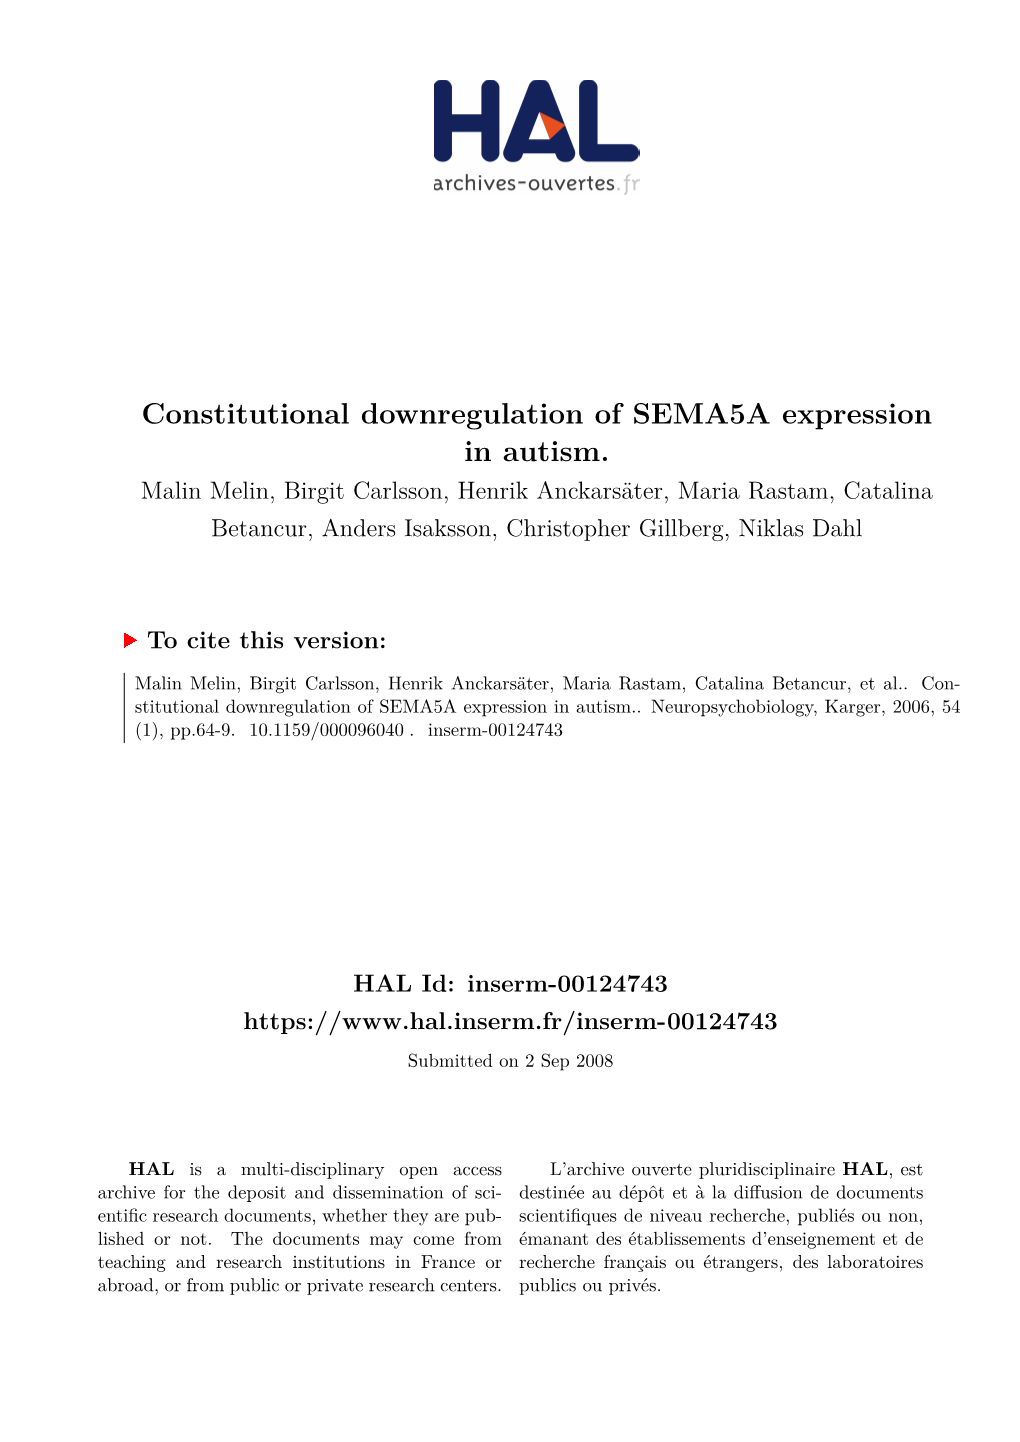 Constitutional Downregulation of SEMA5A Expression in Autism